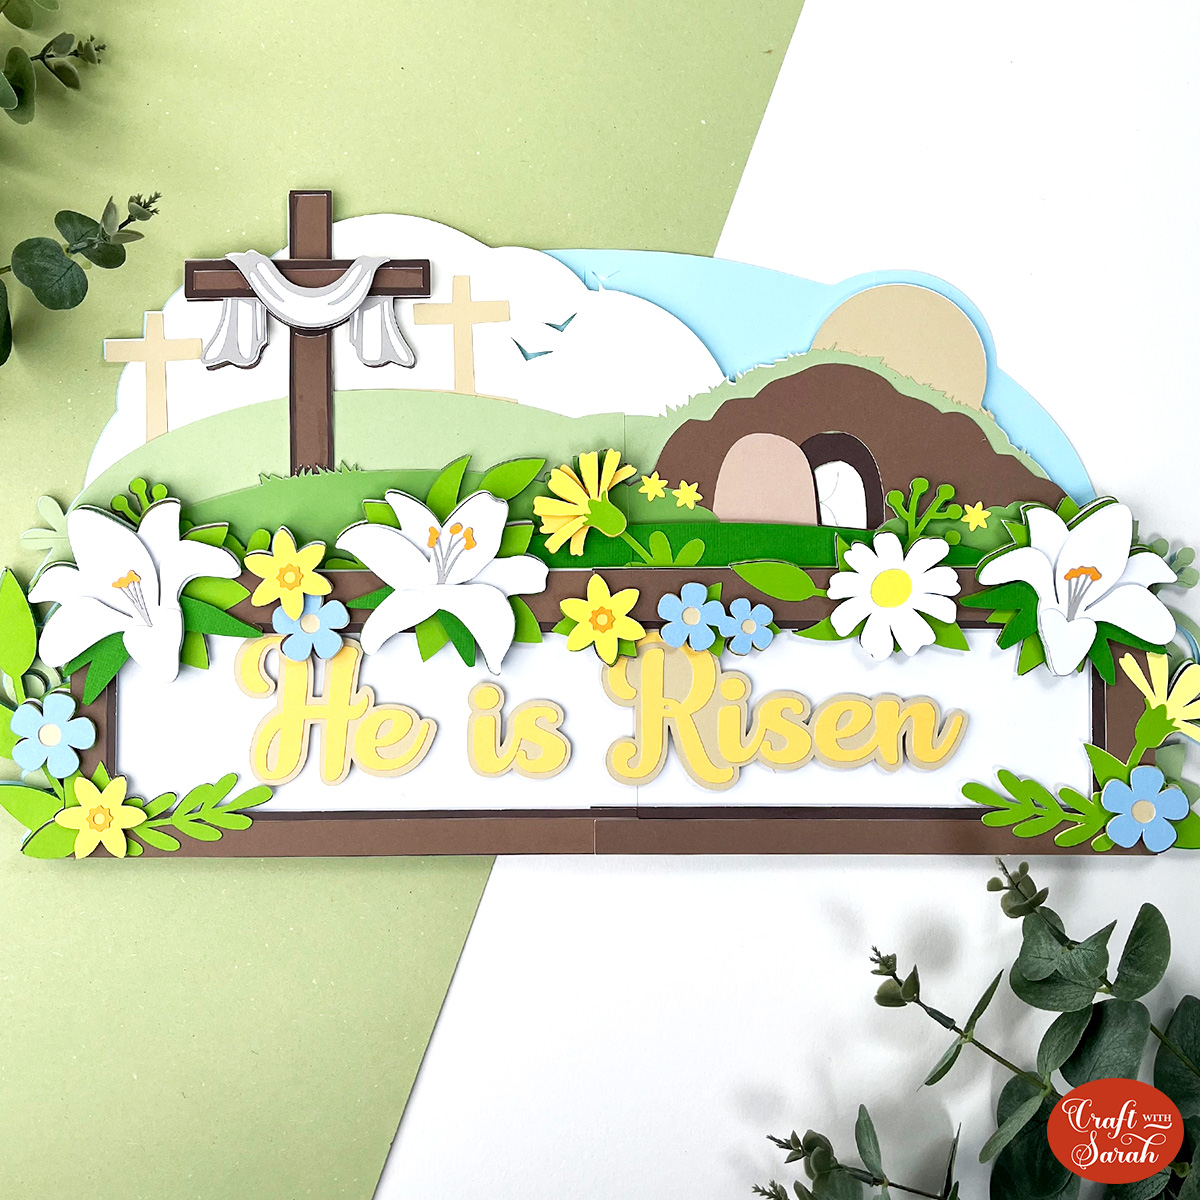 He is Risen giant sign